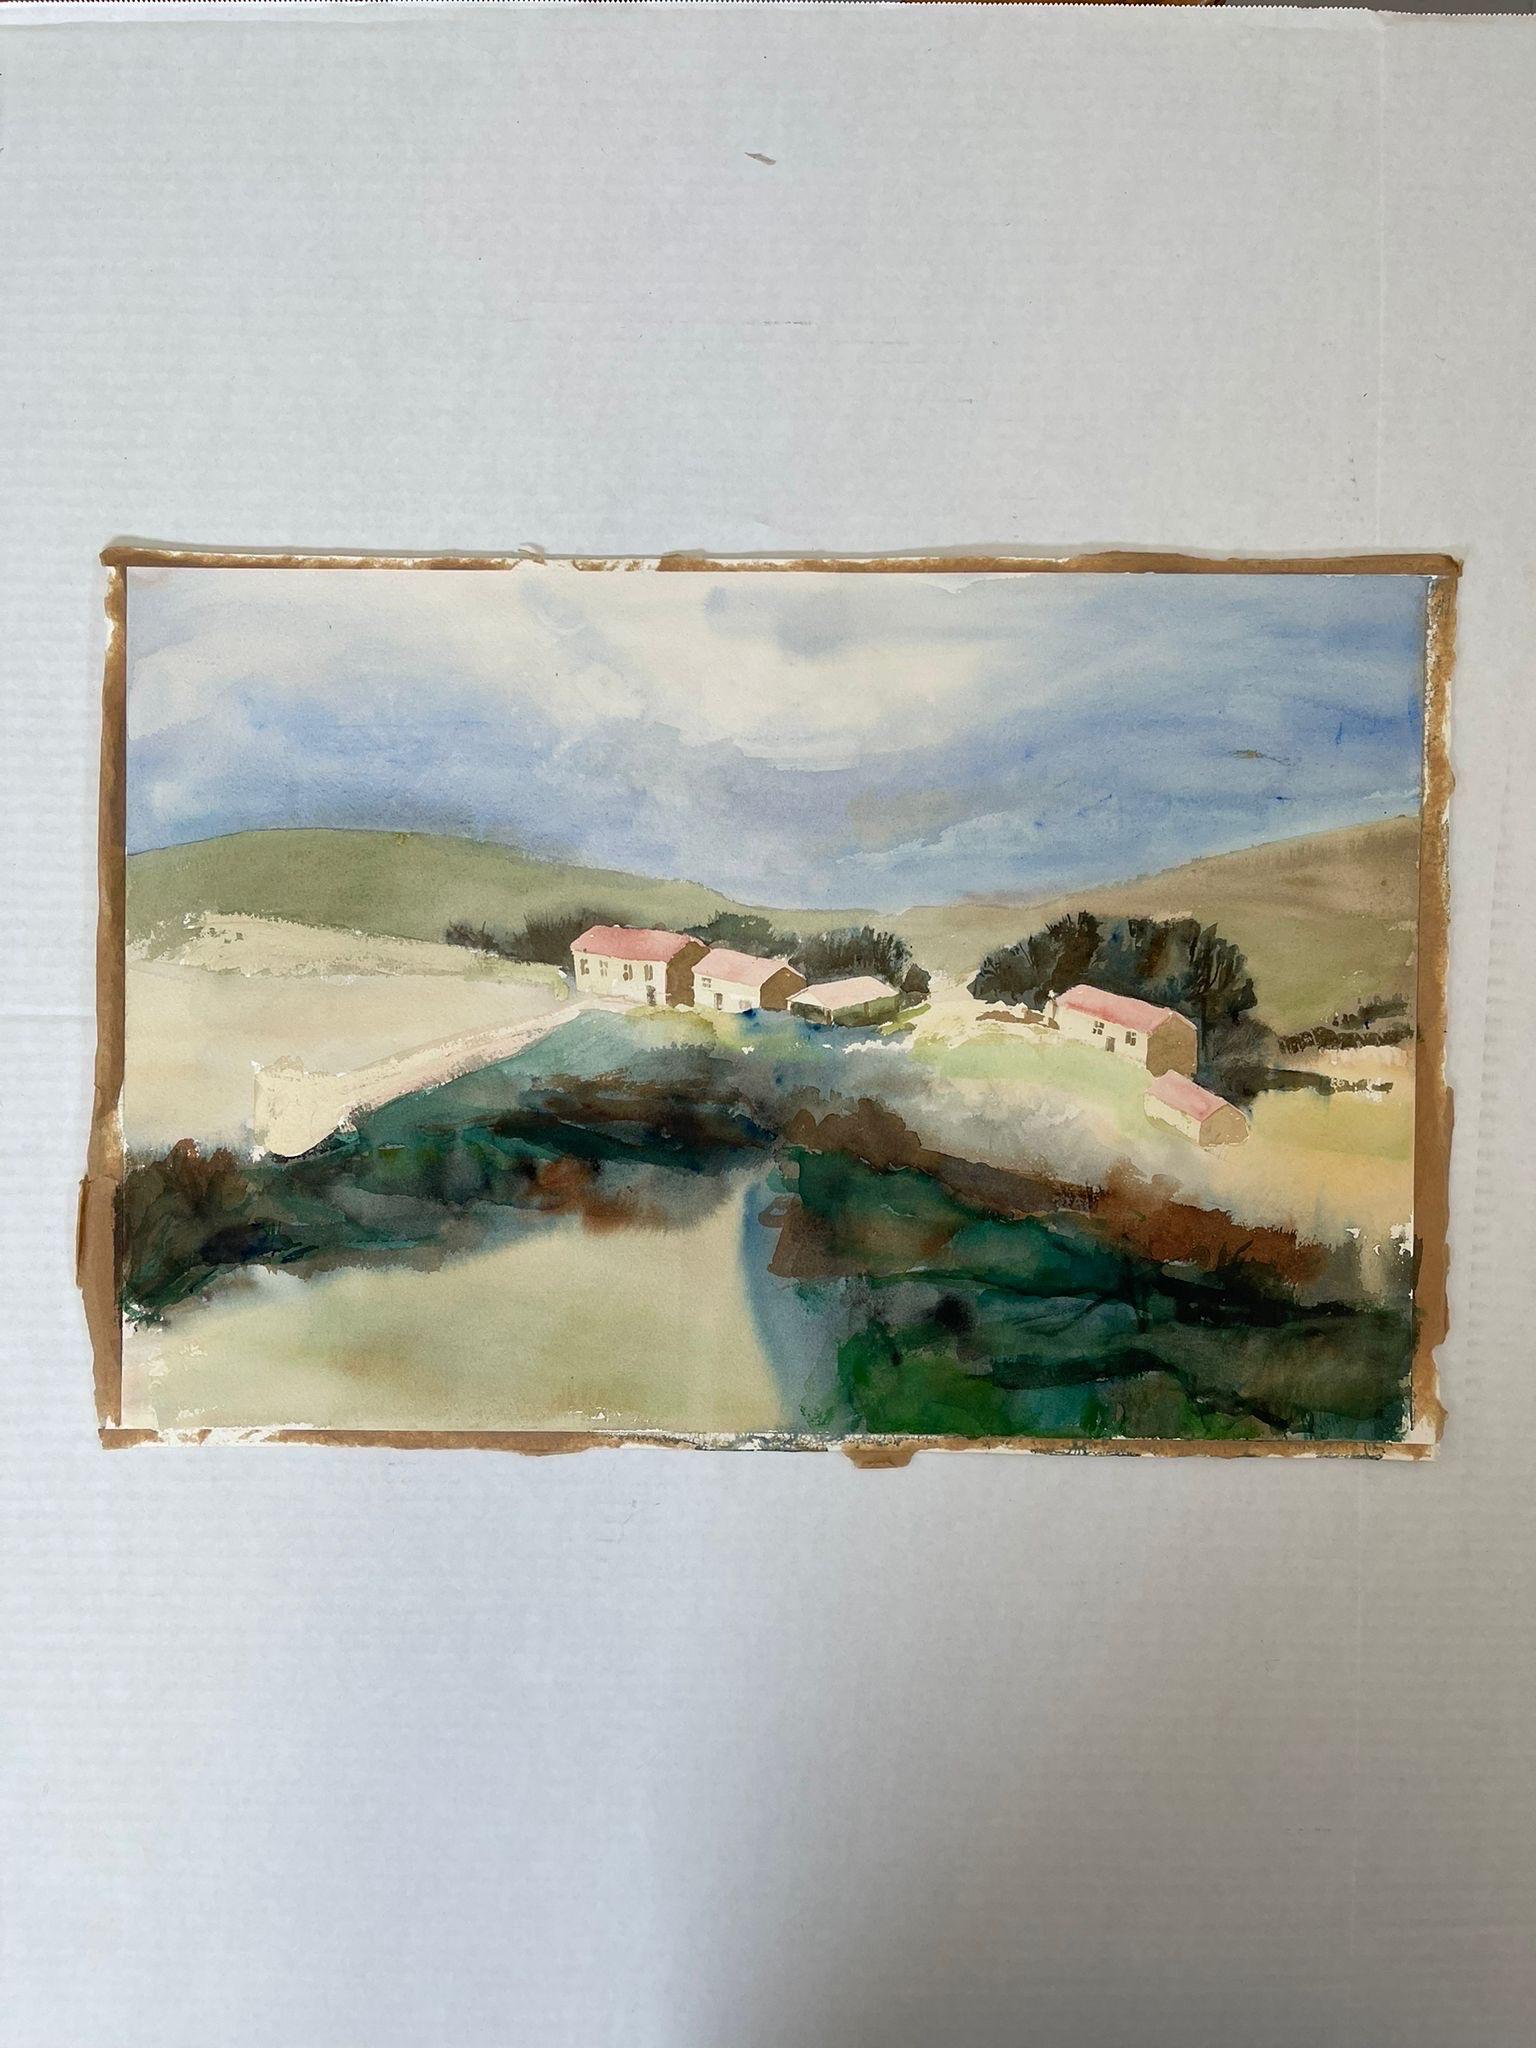 Nature Landscape of Houses by Stream . Primary Colors are Green and Blue. Unsigned. Appears to Have Previously Been Framed due to Conditioning Around the Edges as Pictured.

Dimensions. 22 1/2 W ; 1/4 D ; 15 H